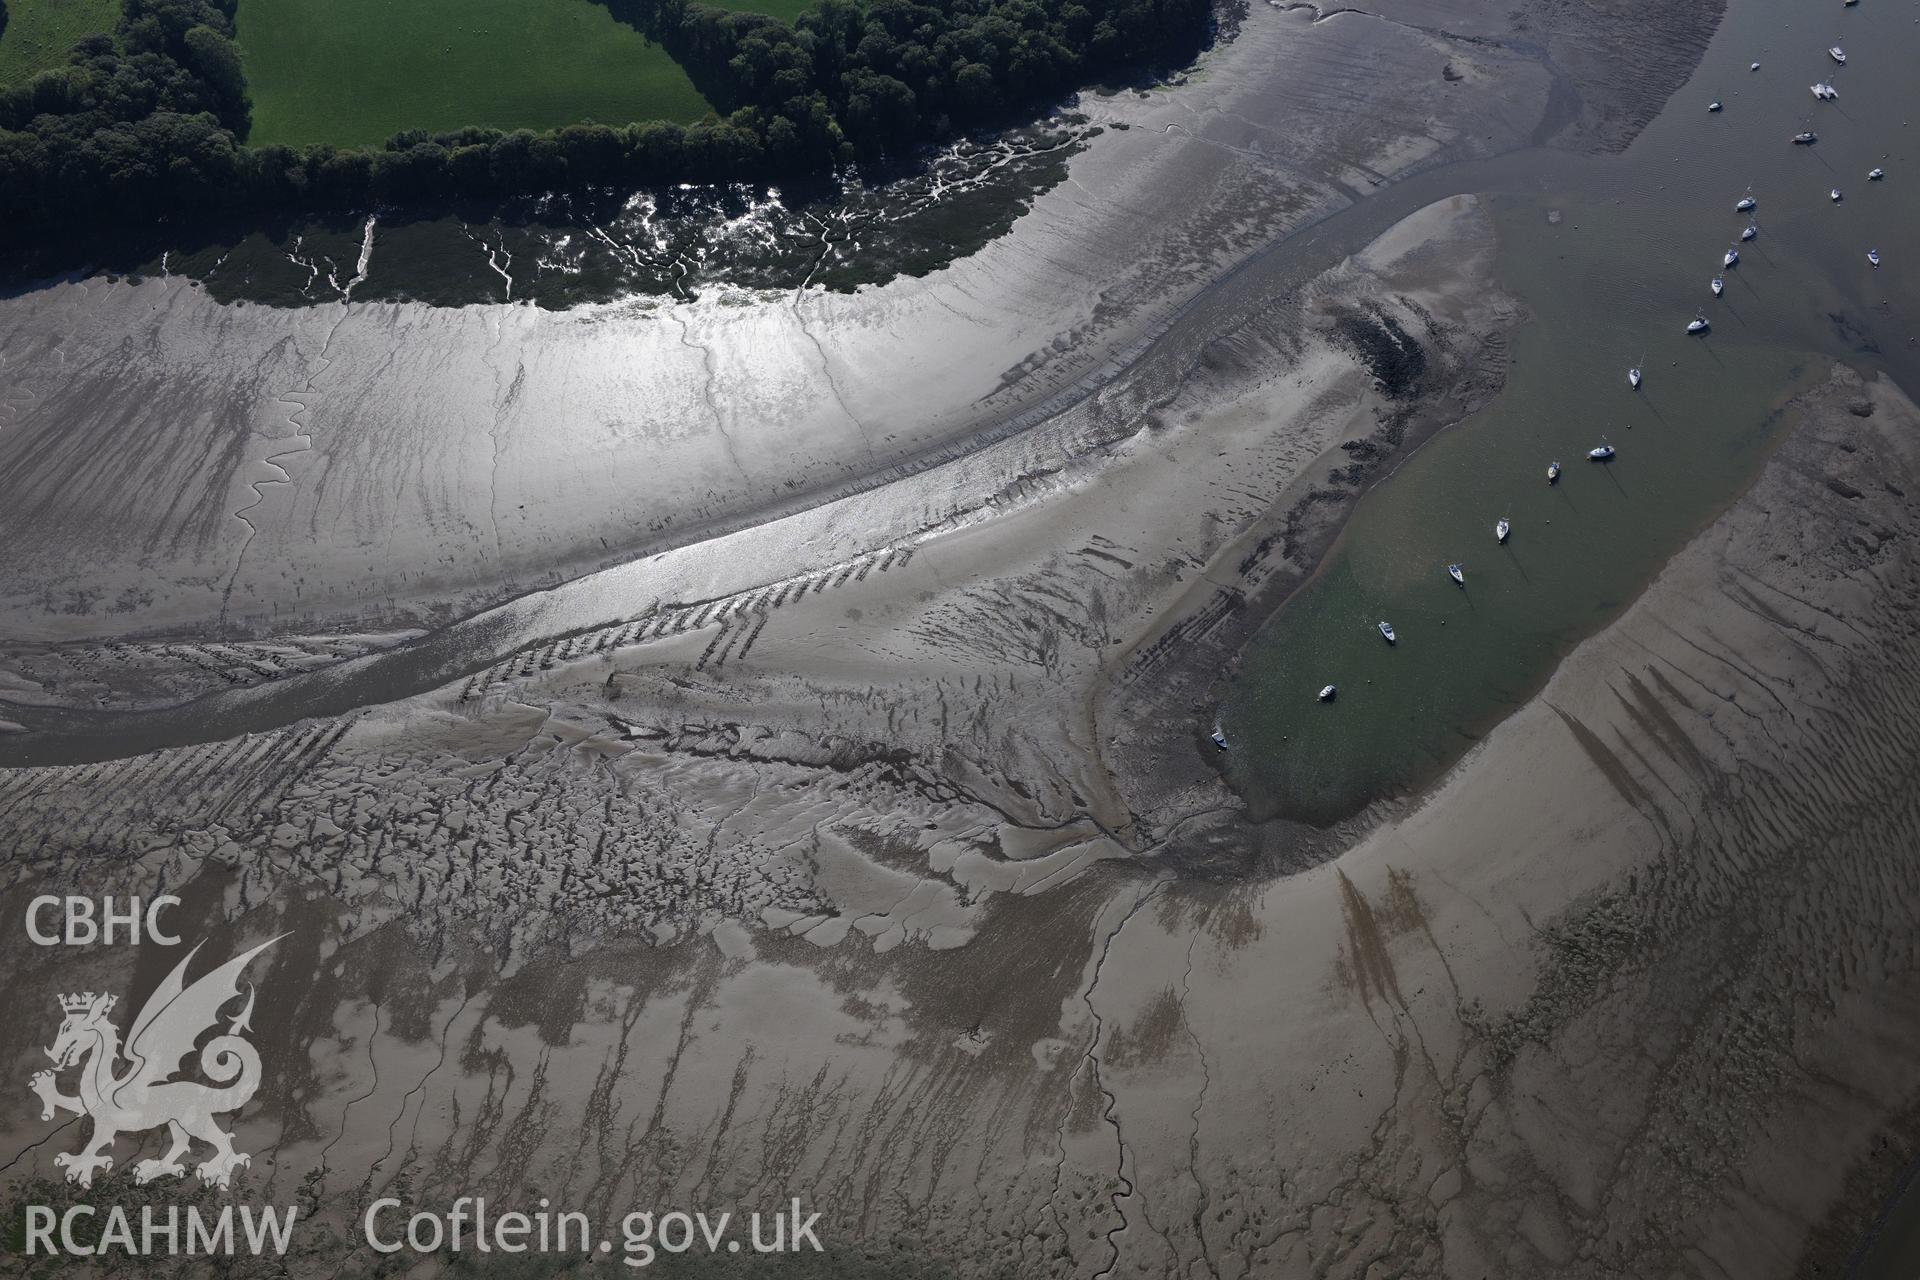 Black Mixon Pool, Cresswell River, Lawrenny, north east of Pembroke Dock. Oblique aerial photograph taken during the Royal Commission's programme of archaeological aerial reconnaissance by Toby Driver on 30th September 2015.